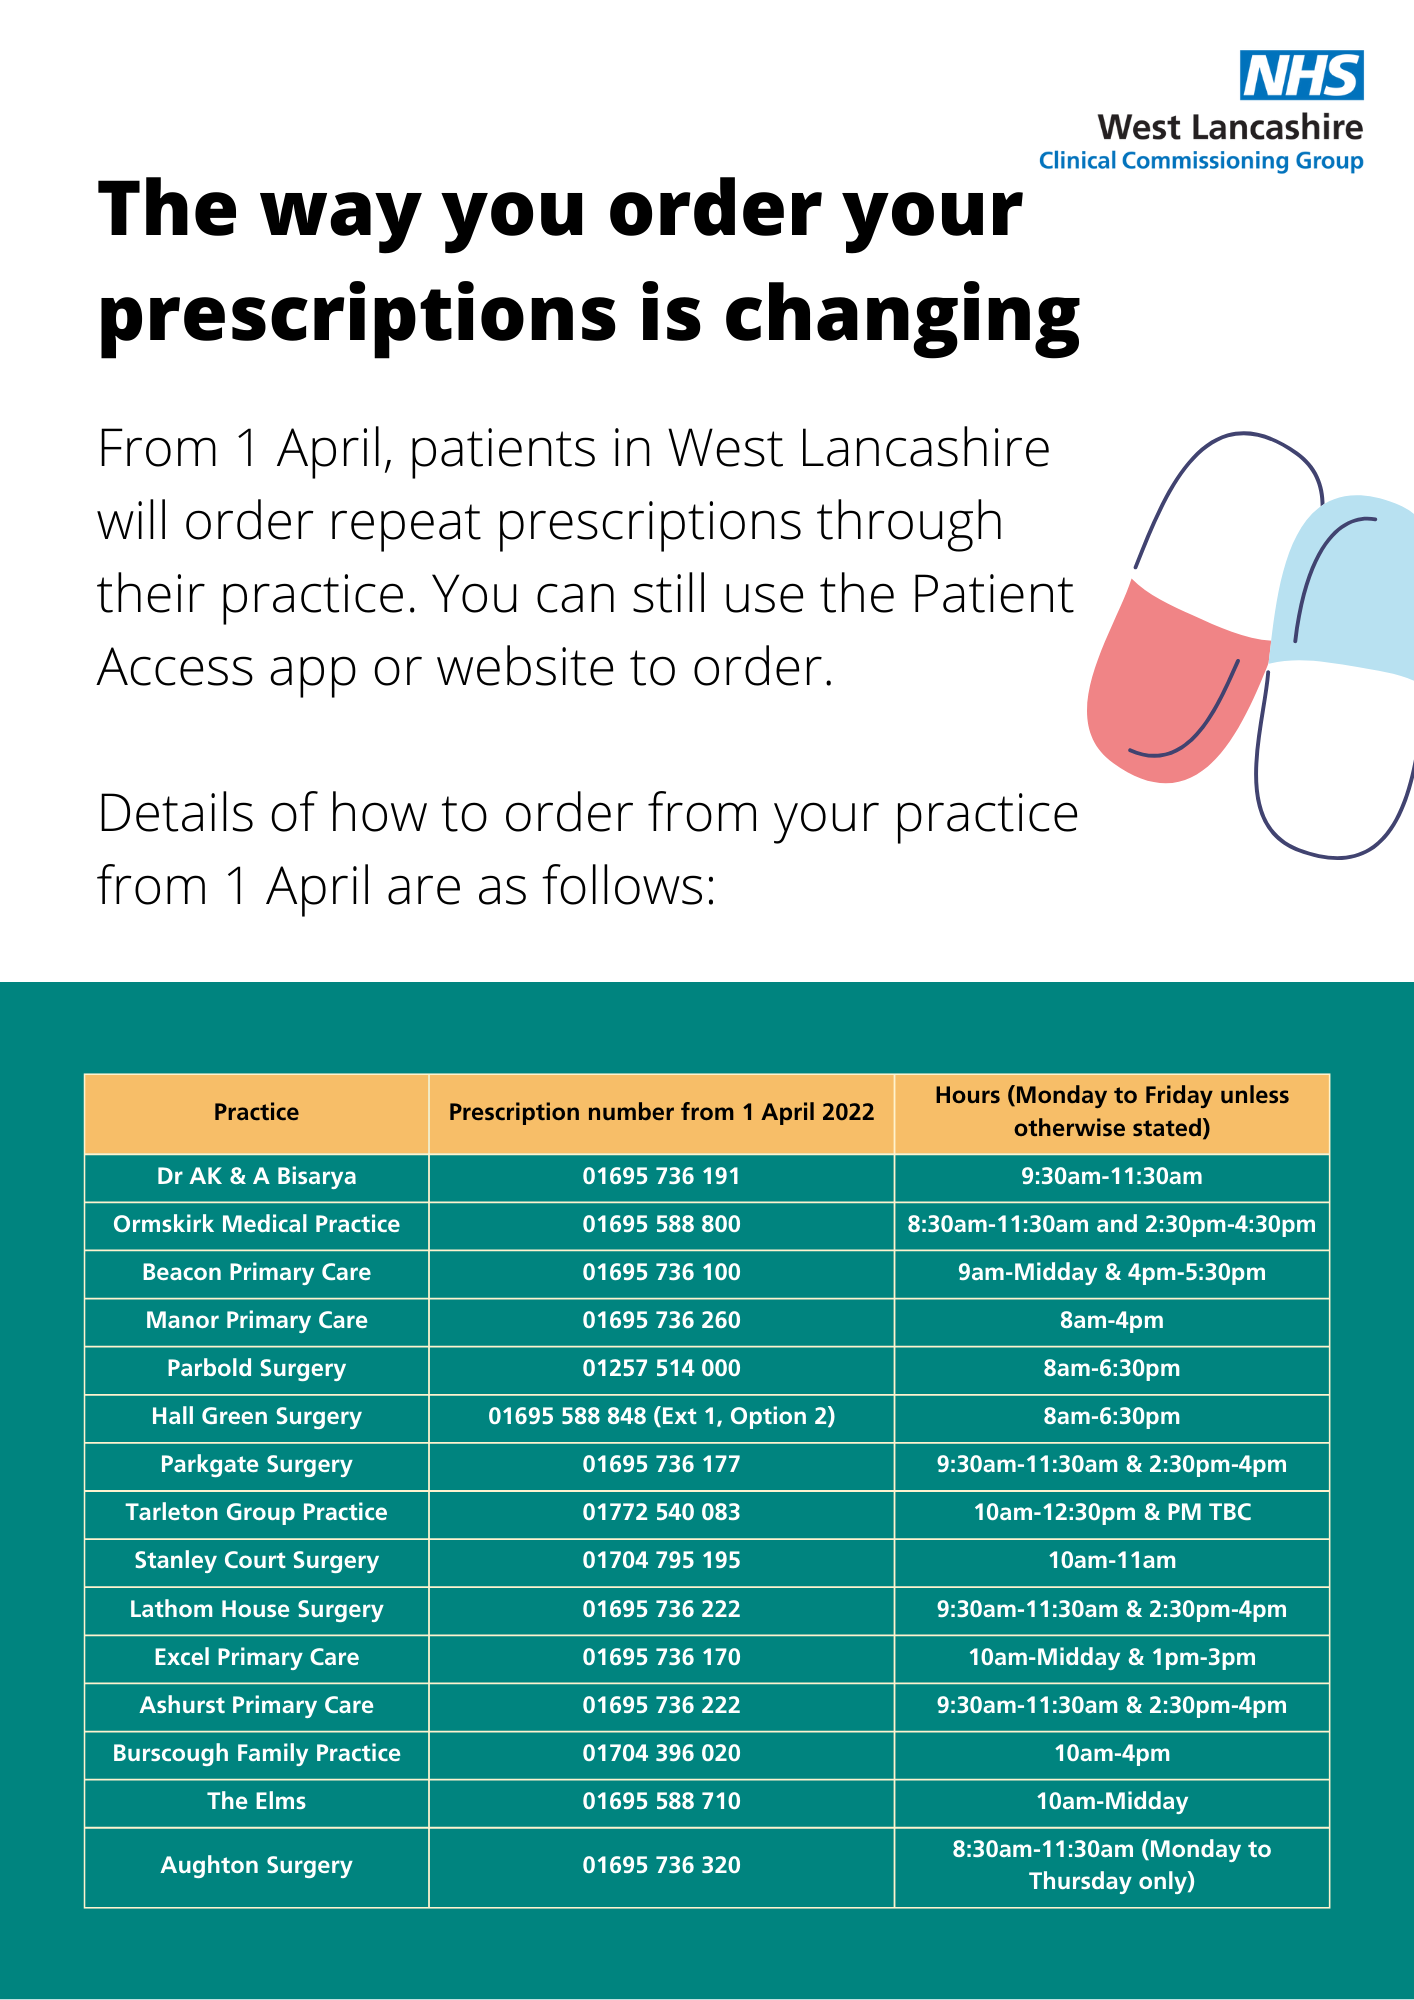 The way you order your prescriptions is changing!